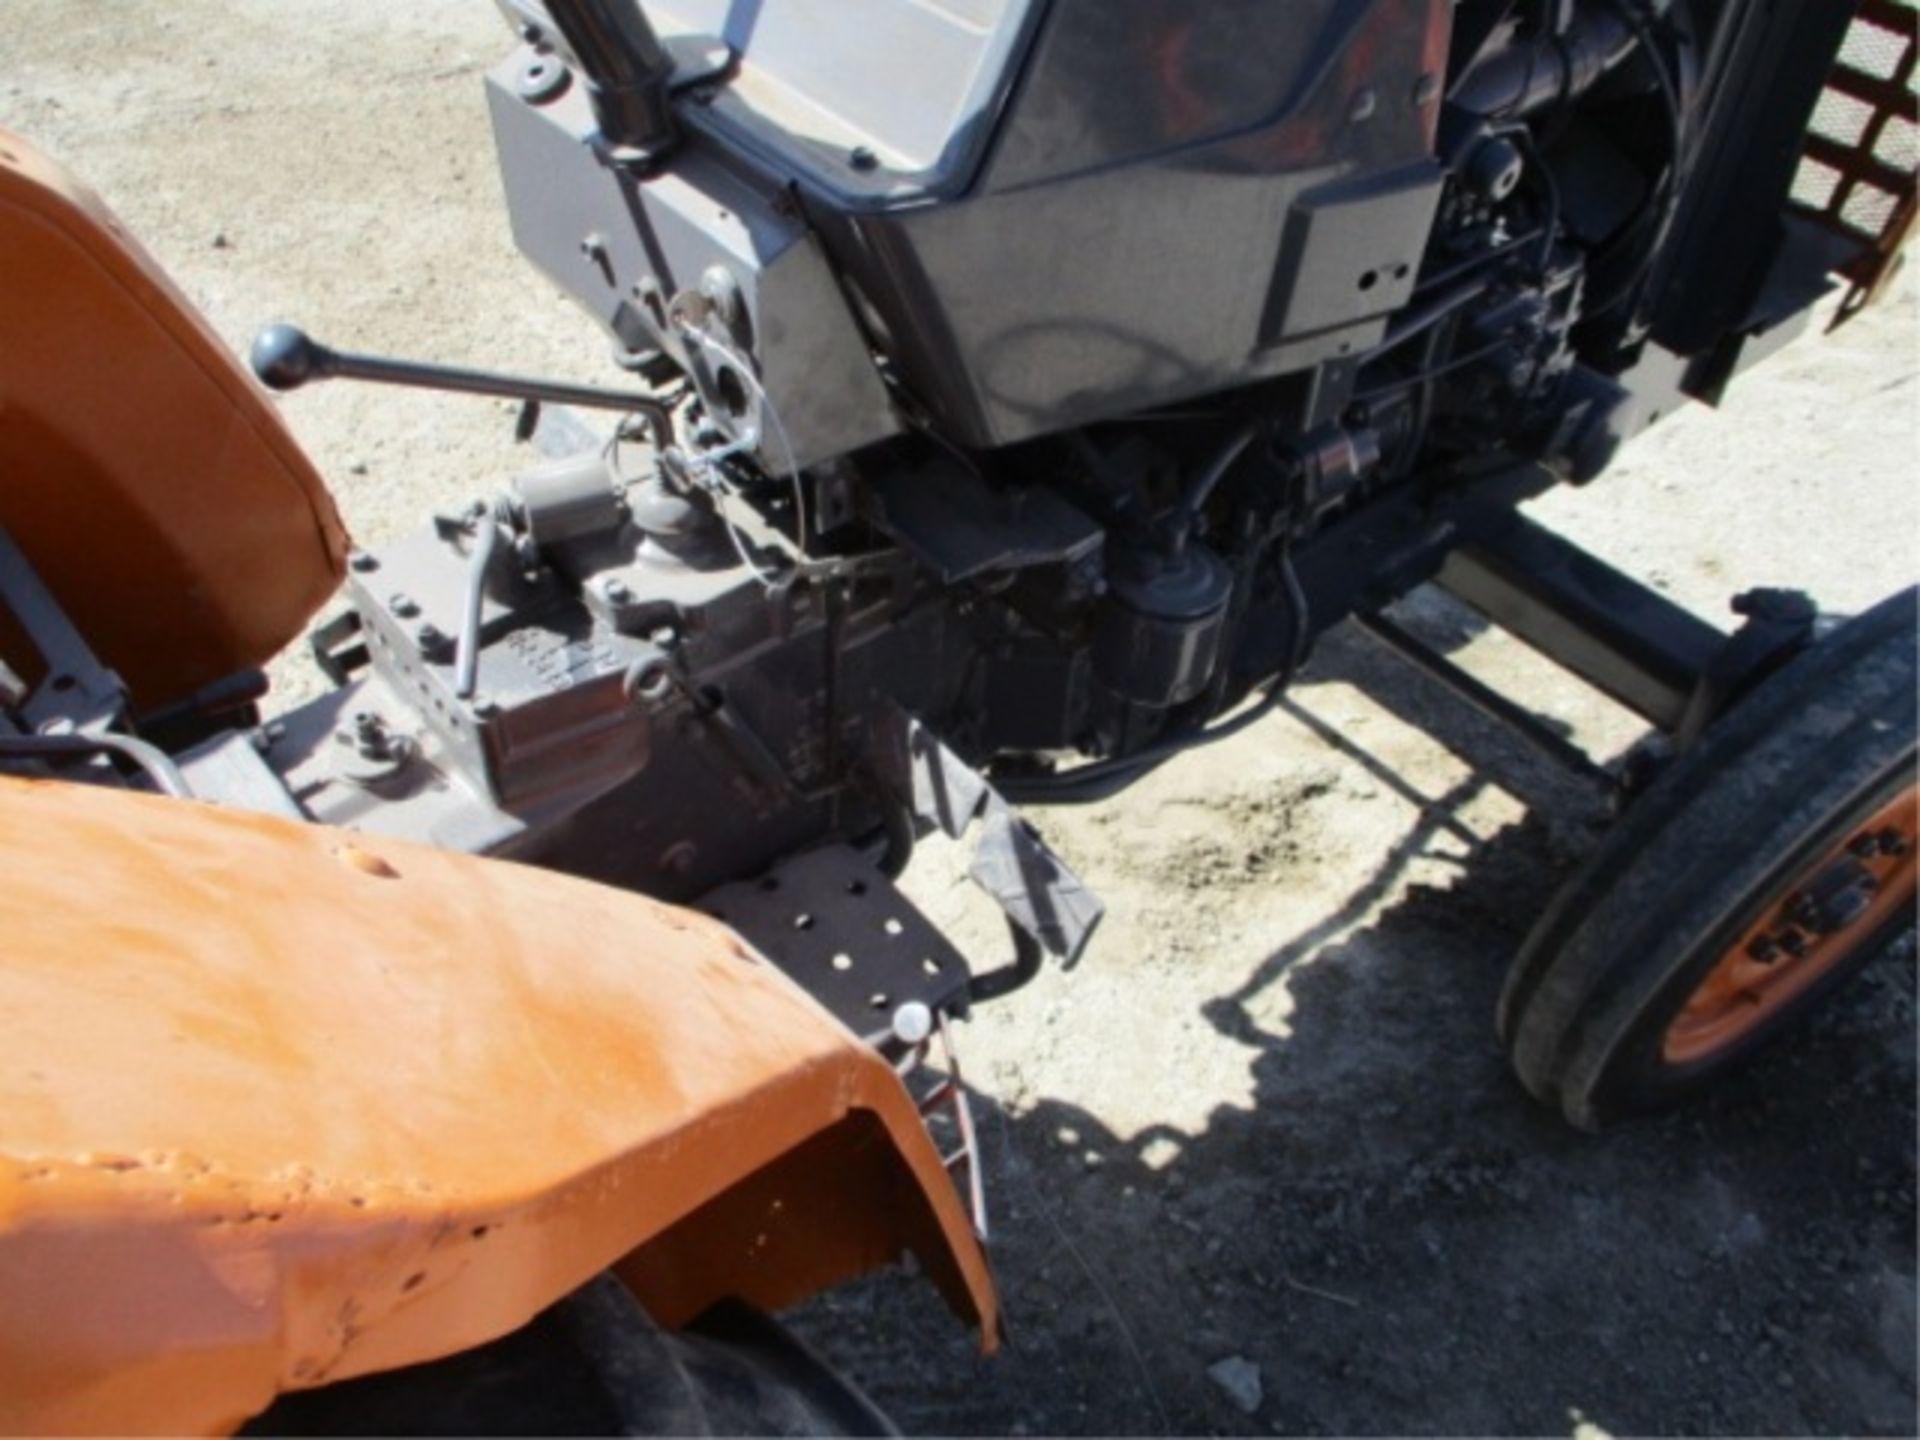 Kubota L2500 Utility Ag Tractor, 3-Cyl Diesel, PTO, 3-Point Hitch, Roll Bar, S/N: 21247, Mile/ - Image 26 of 40